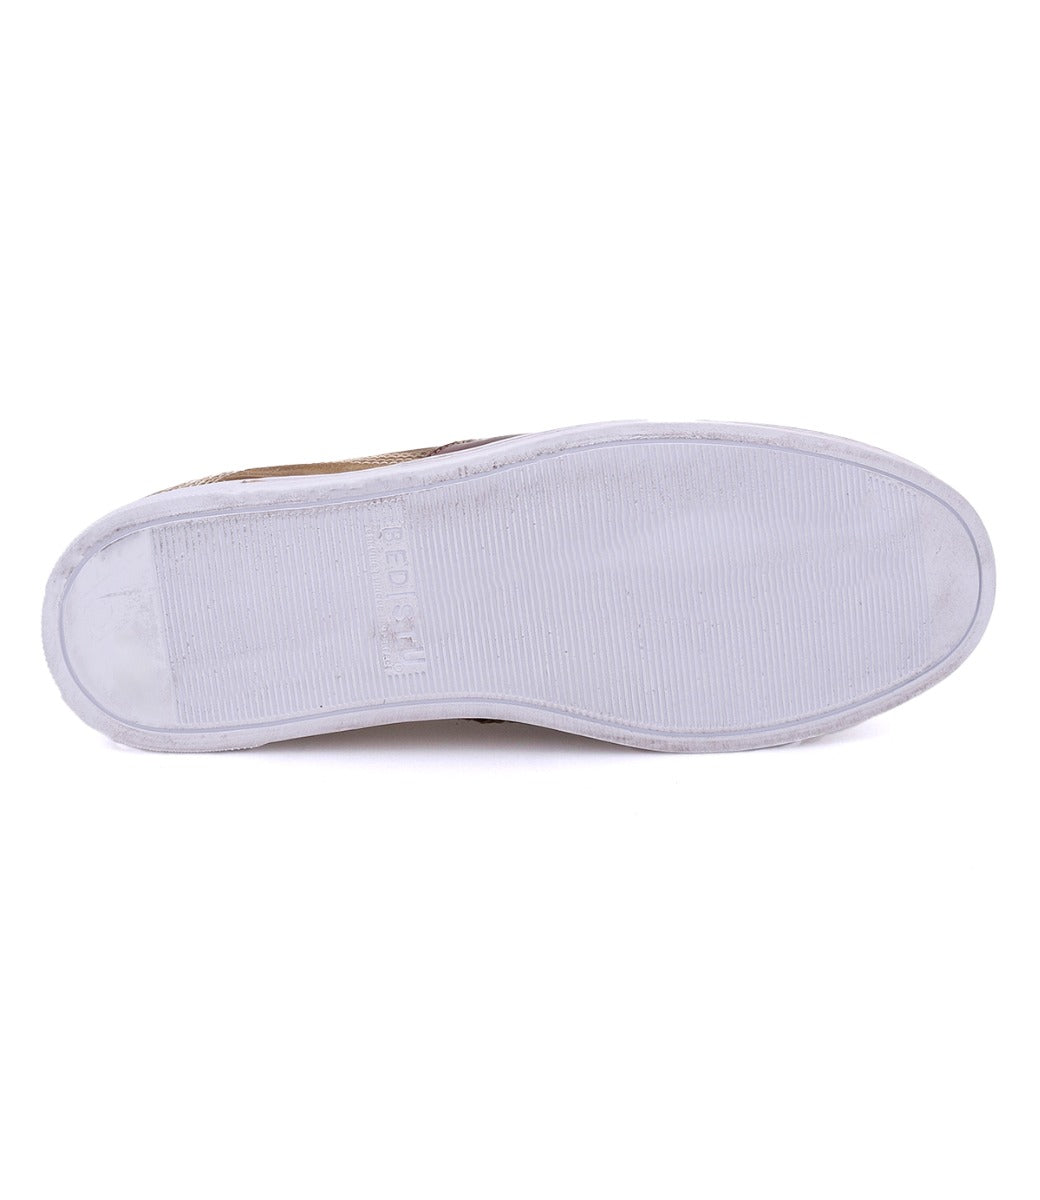 A pair of Carp shoes with white soles on a white background by Bed Stu.